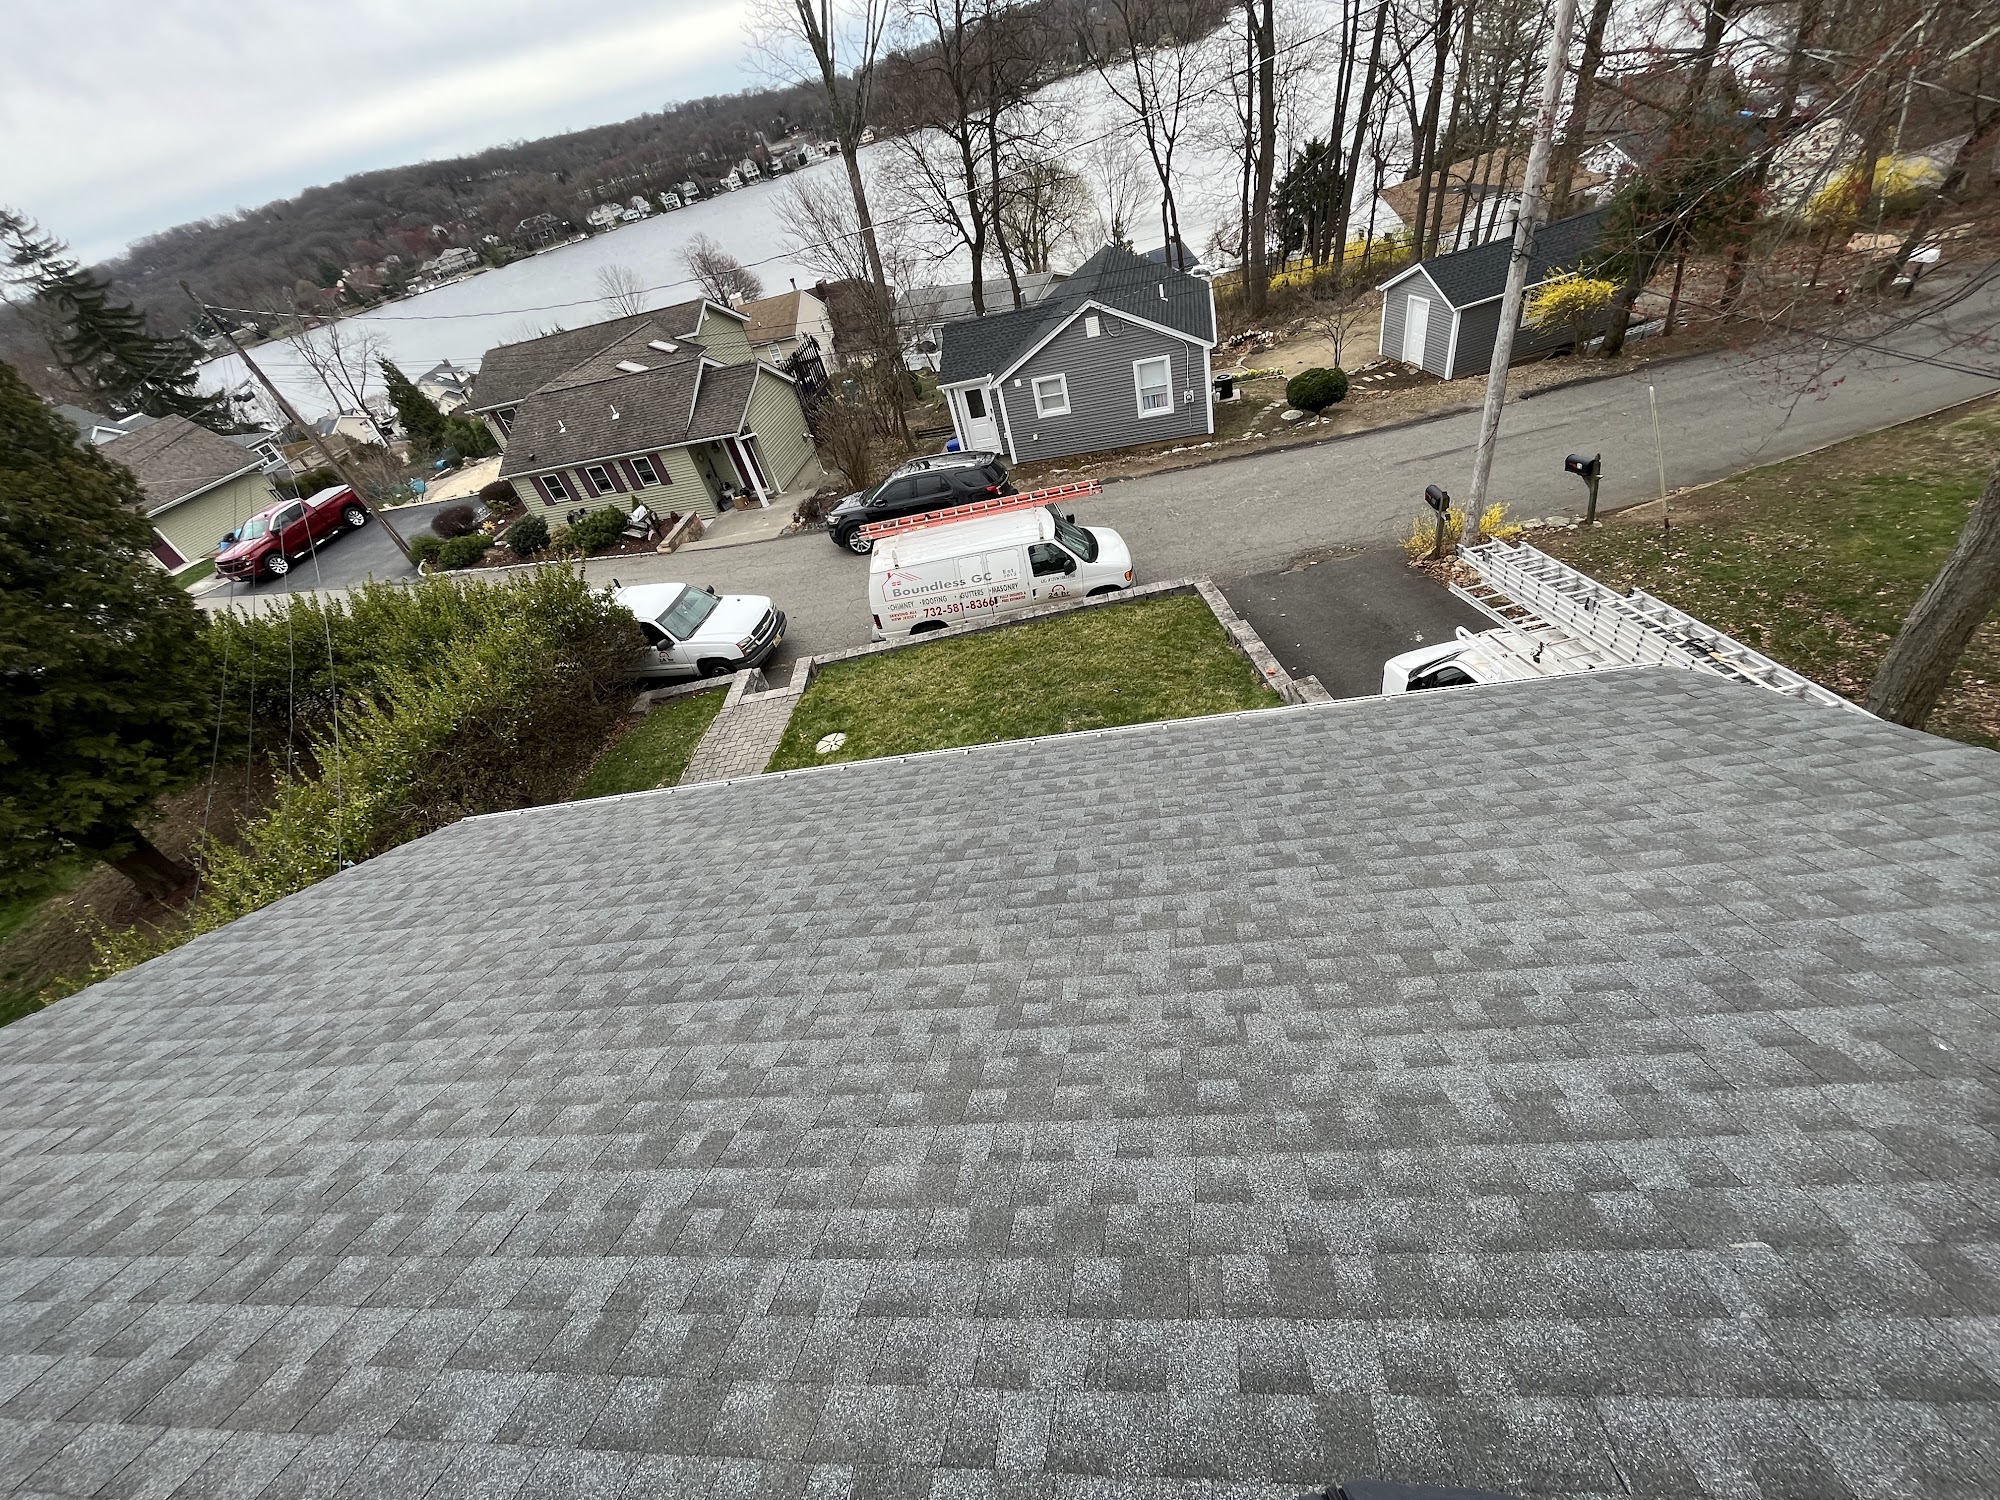 Boundless Roofing & Chimney